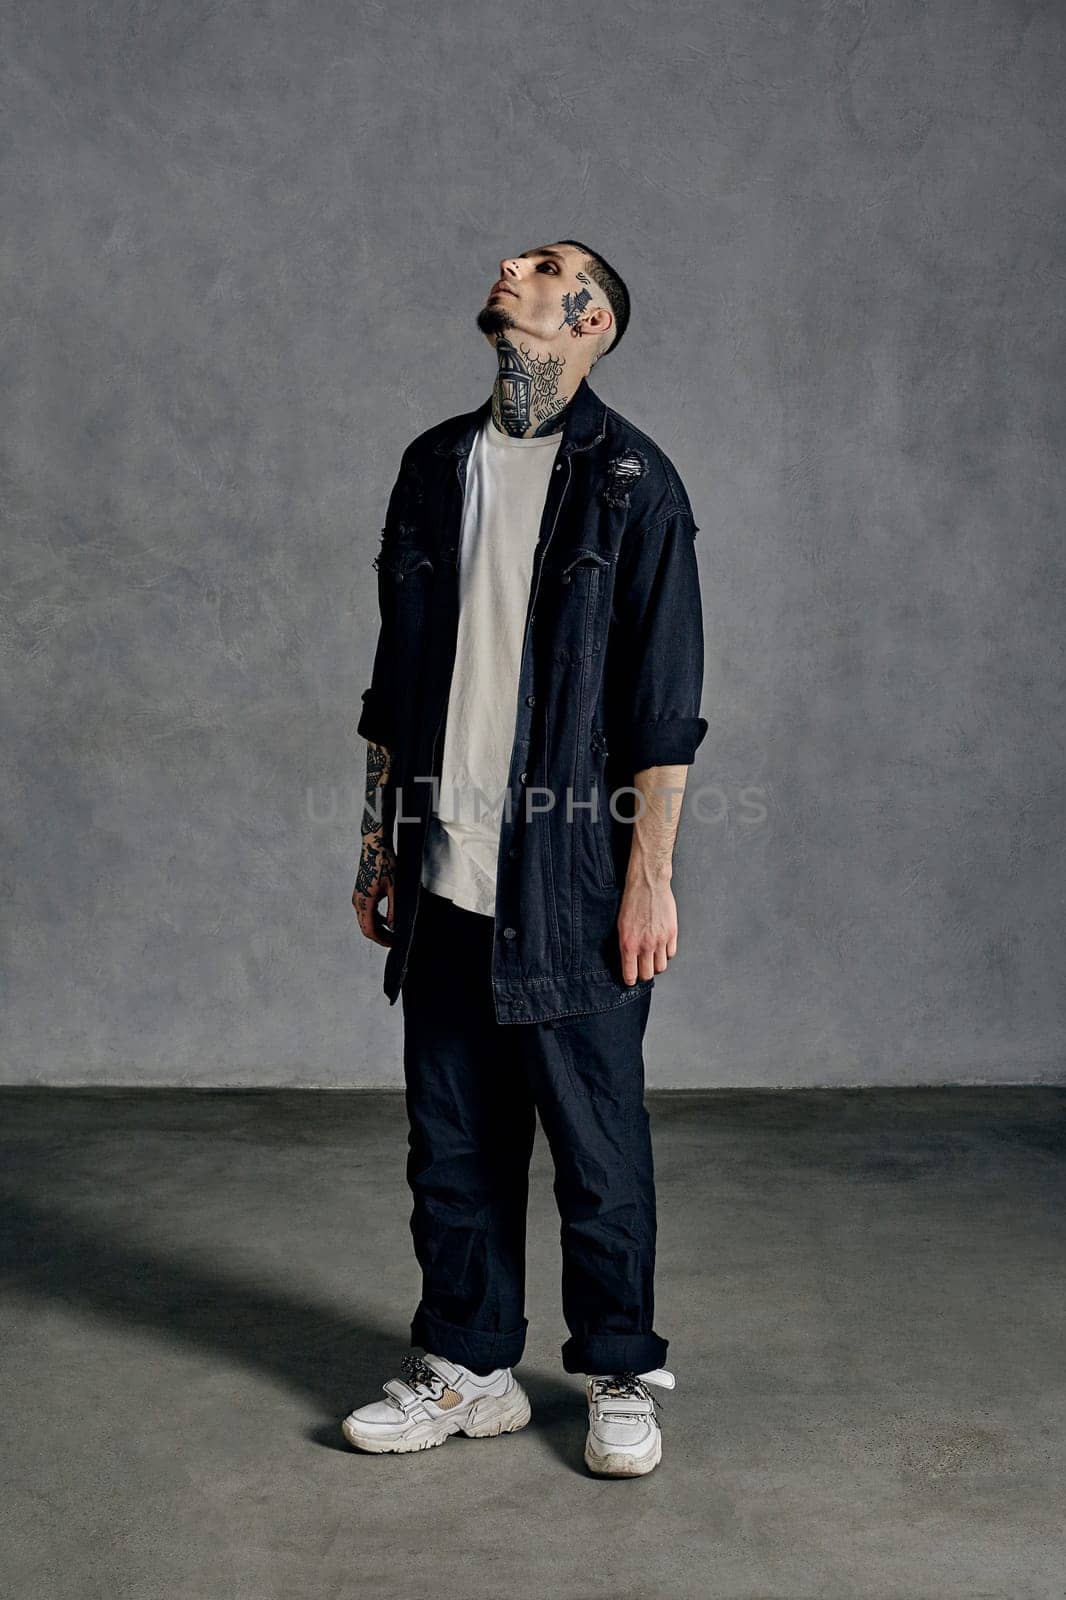 Athletic male with tattooed body and face, beard. Dressed in white t-shirt and sneakers, black denim shirt, pants. Looking up, standing against gray background. Dancehall, hip-hop. Full length